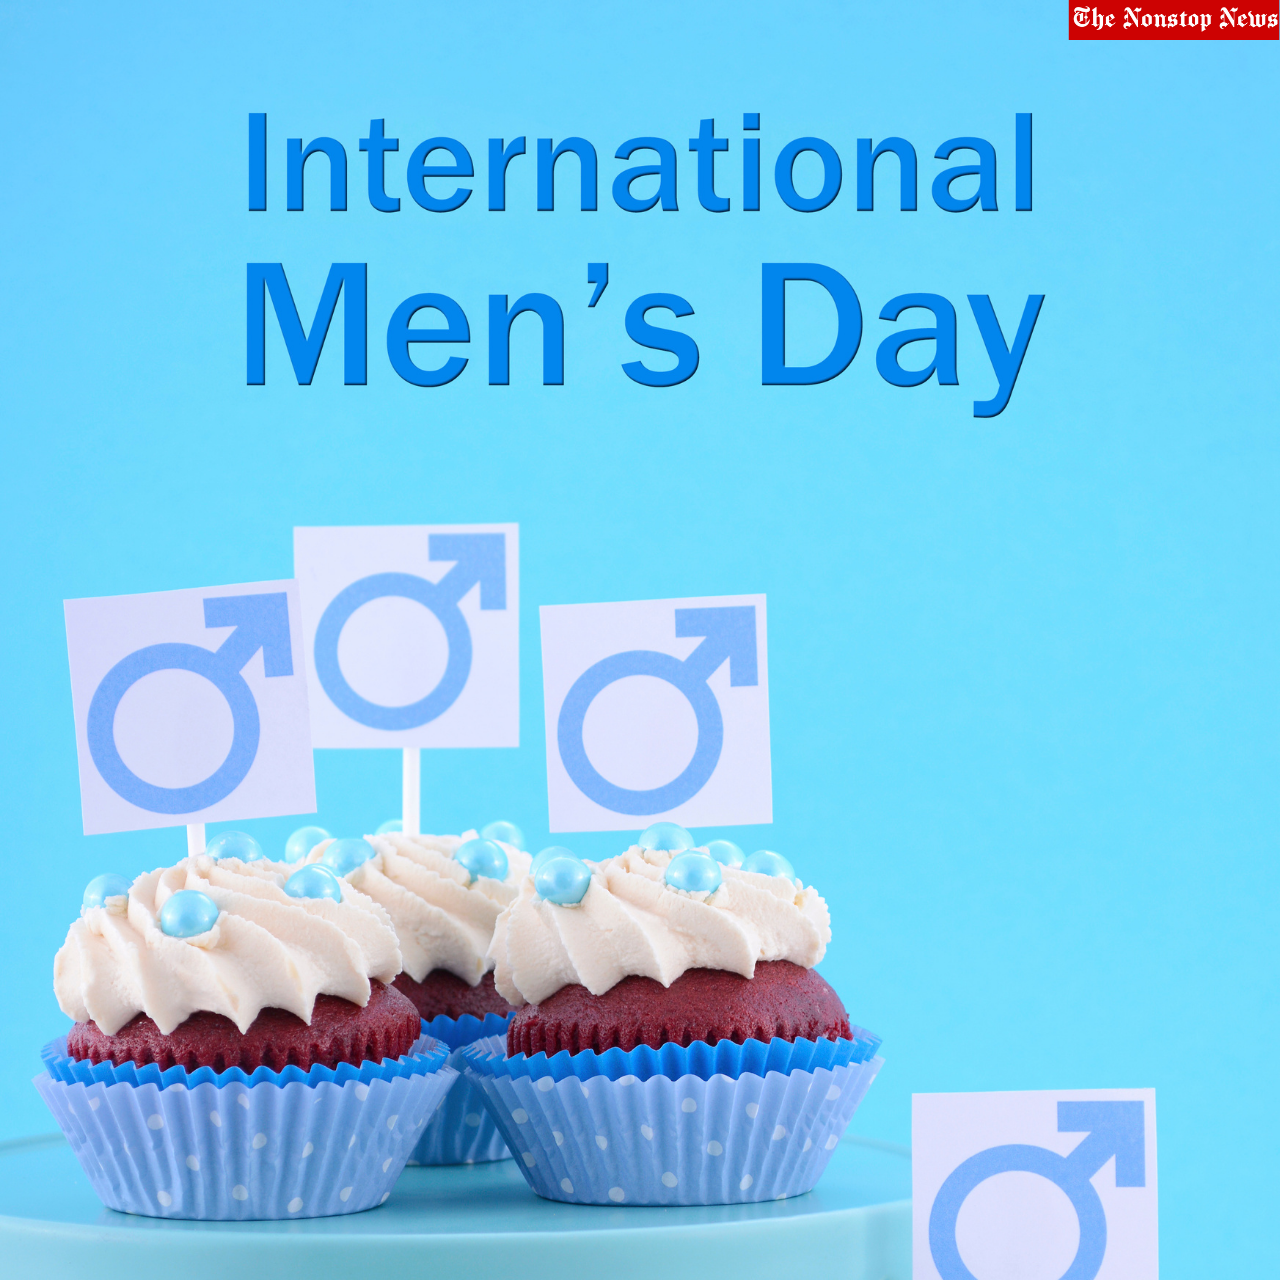 International Men's Day 2021 Wishes, Quotes, HD Images, Messages, Greetings, and Poster to greet Boyfriend/Husband